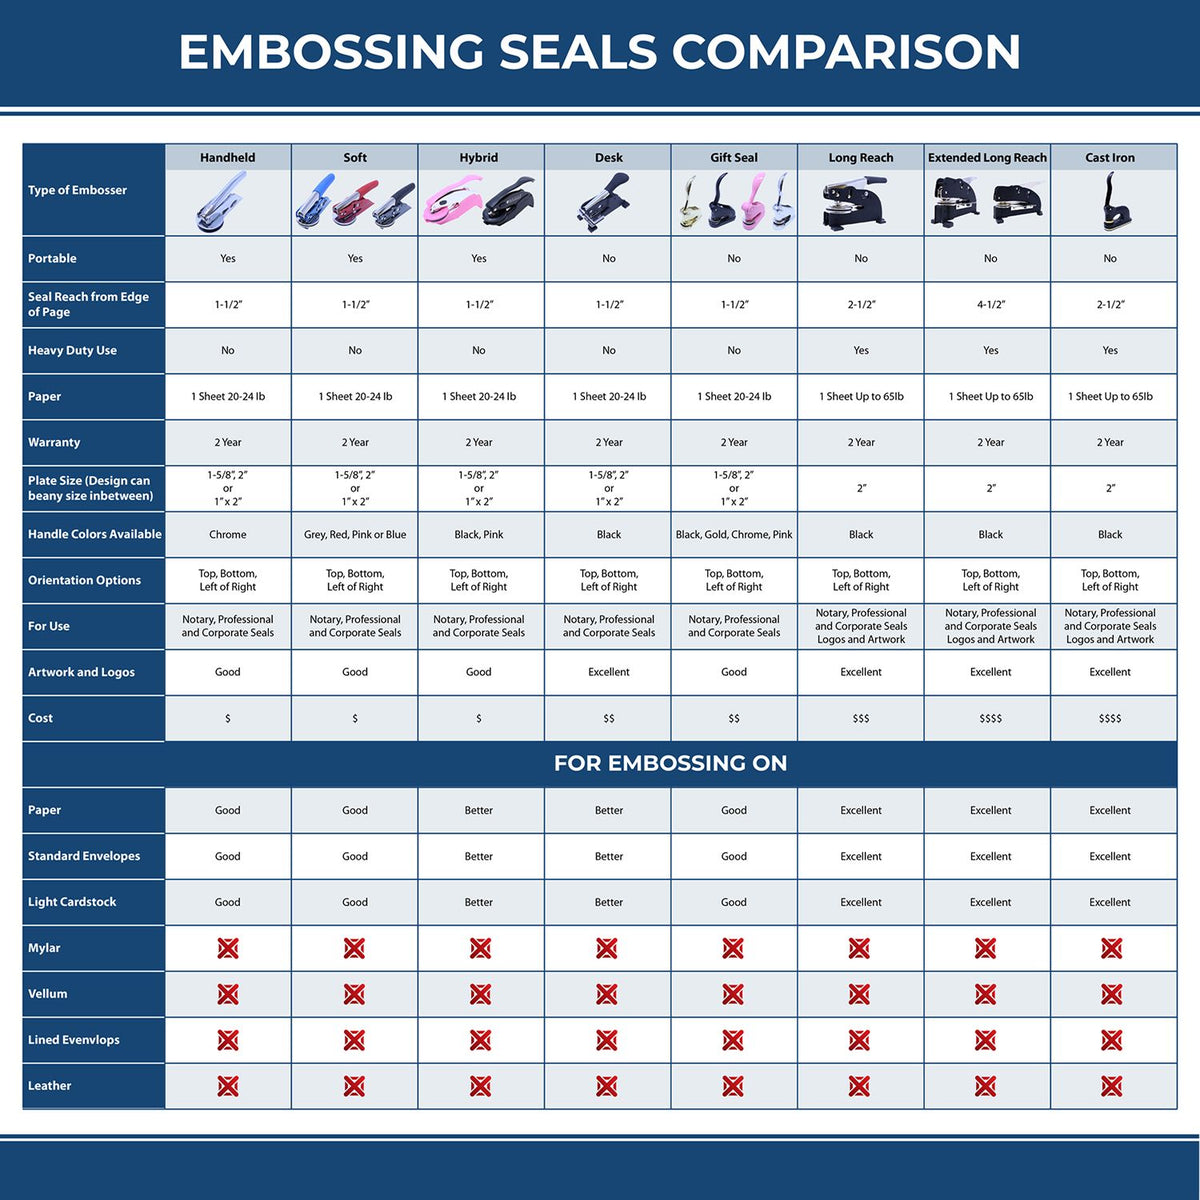 A comparison chart for the different types of mount models available for the State of District of Columbia Extended Long Reach Geologist Seal